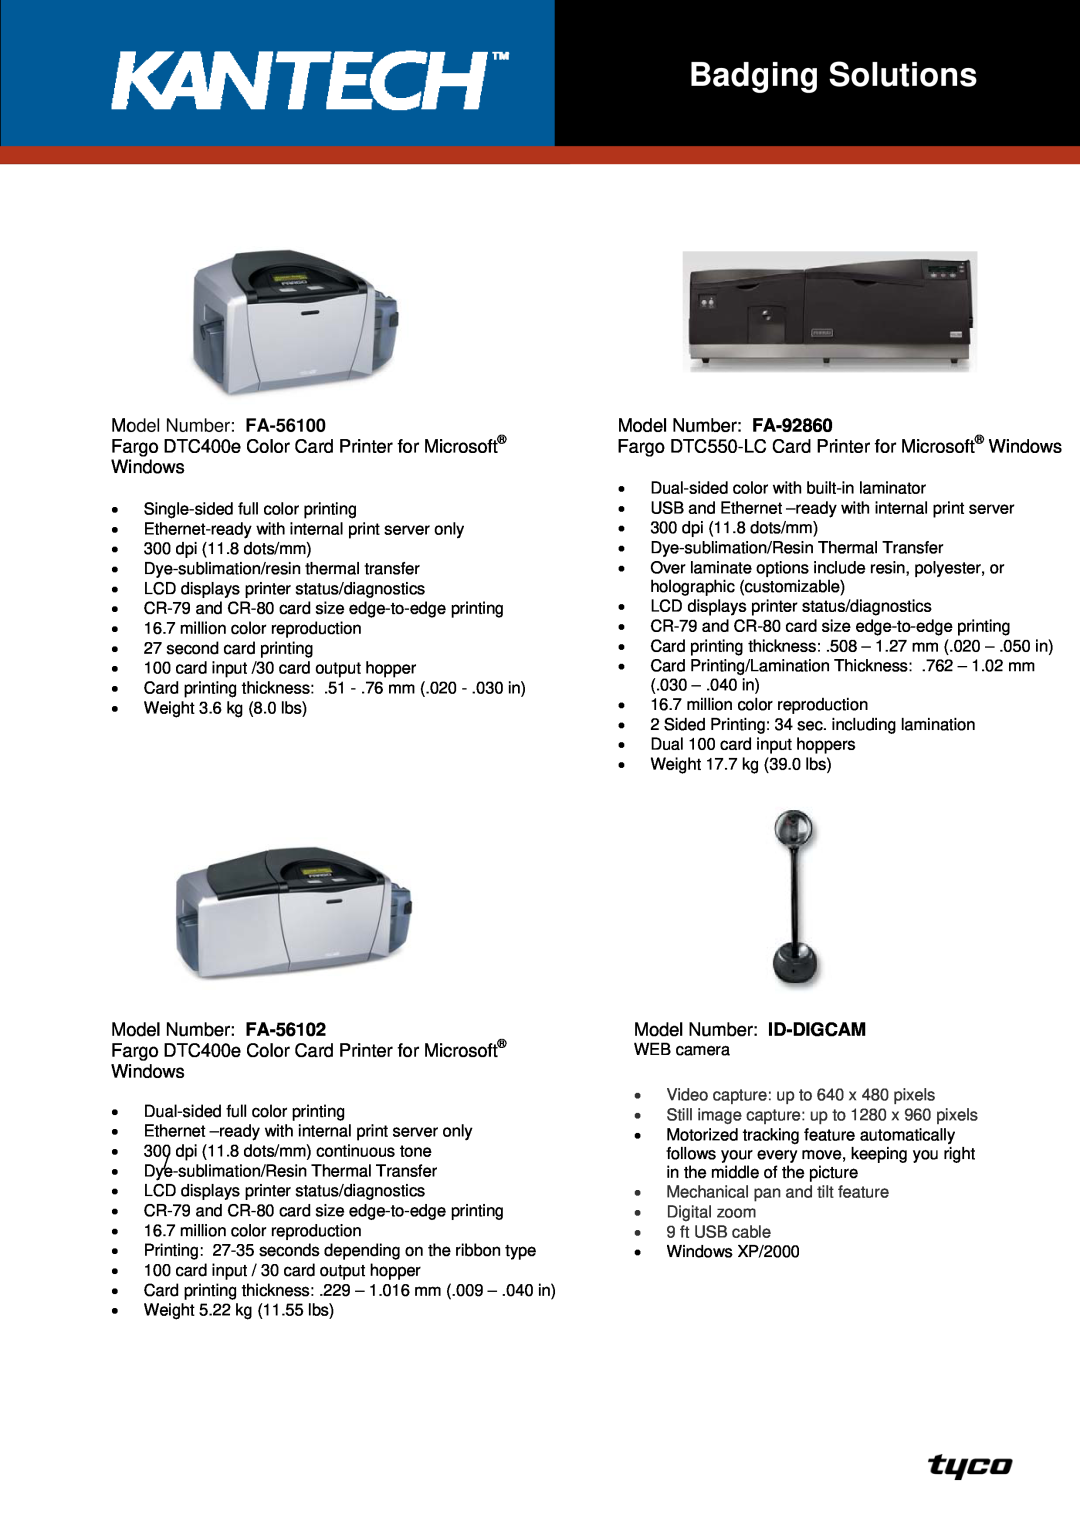 Tyco FA-56102 manual Badging Solutions, Video capture up to 640 x 480 pixels, Still image capture up to 1280 x 960 pixels 